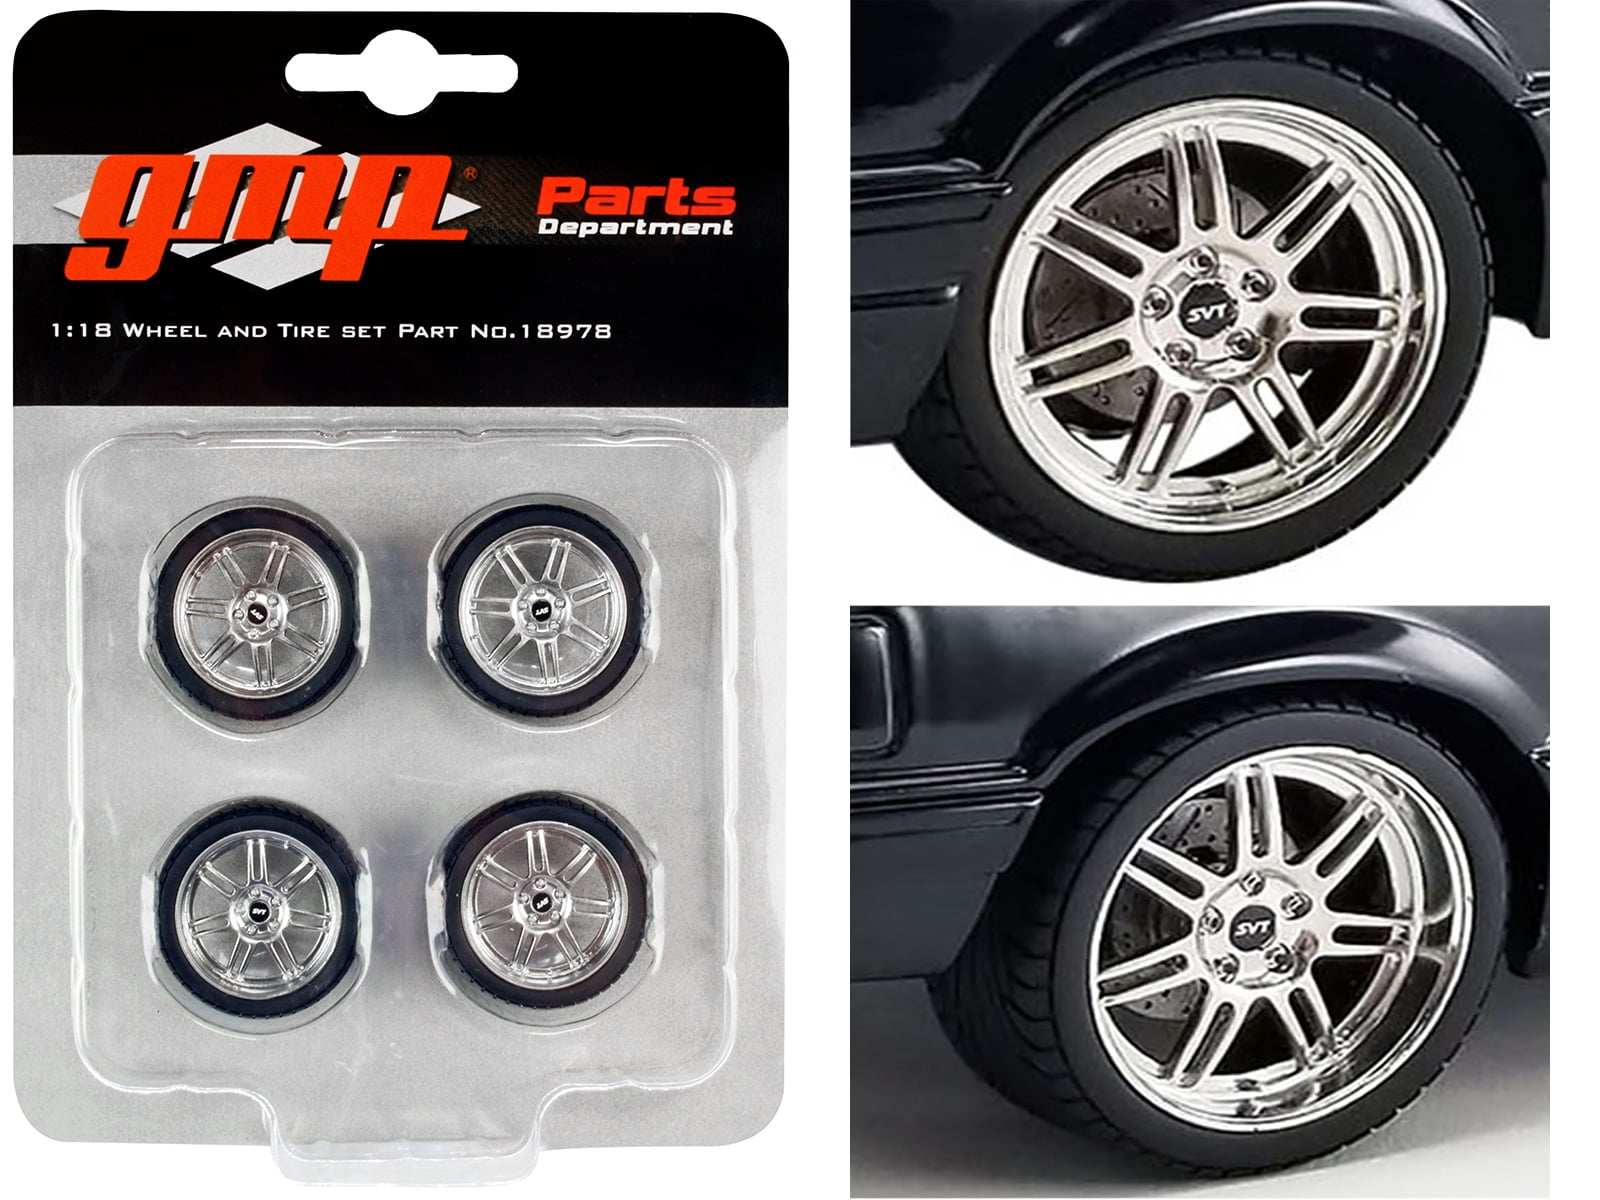 Picture of GMP 18978 Custom SVT 7-Spoke Wheel & Tire Set of 4 Pieces Custom 1 by 18 Scale Model for 1990 Ford Mustang 5.0